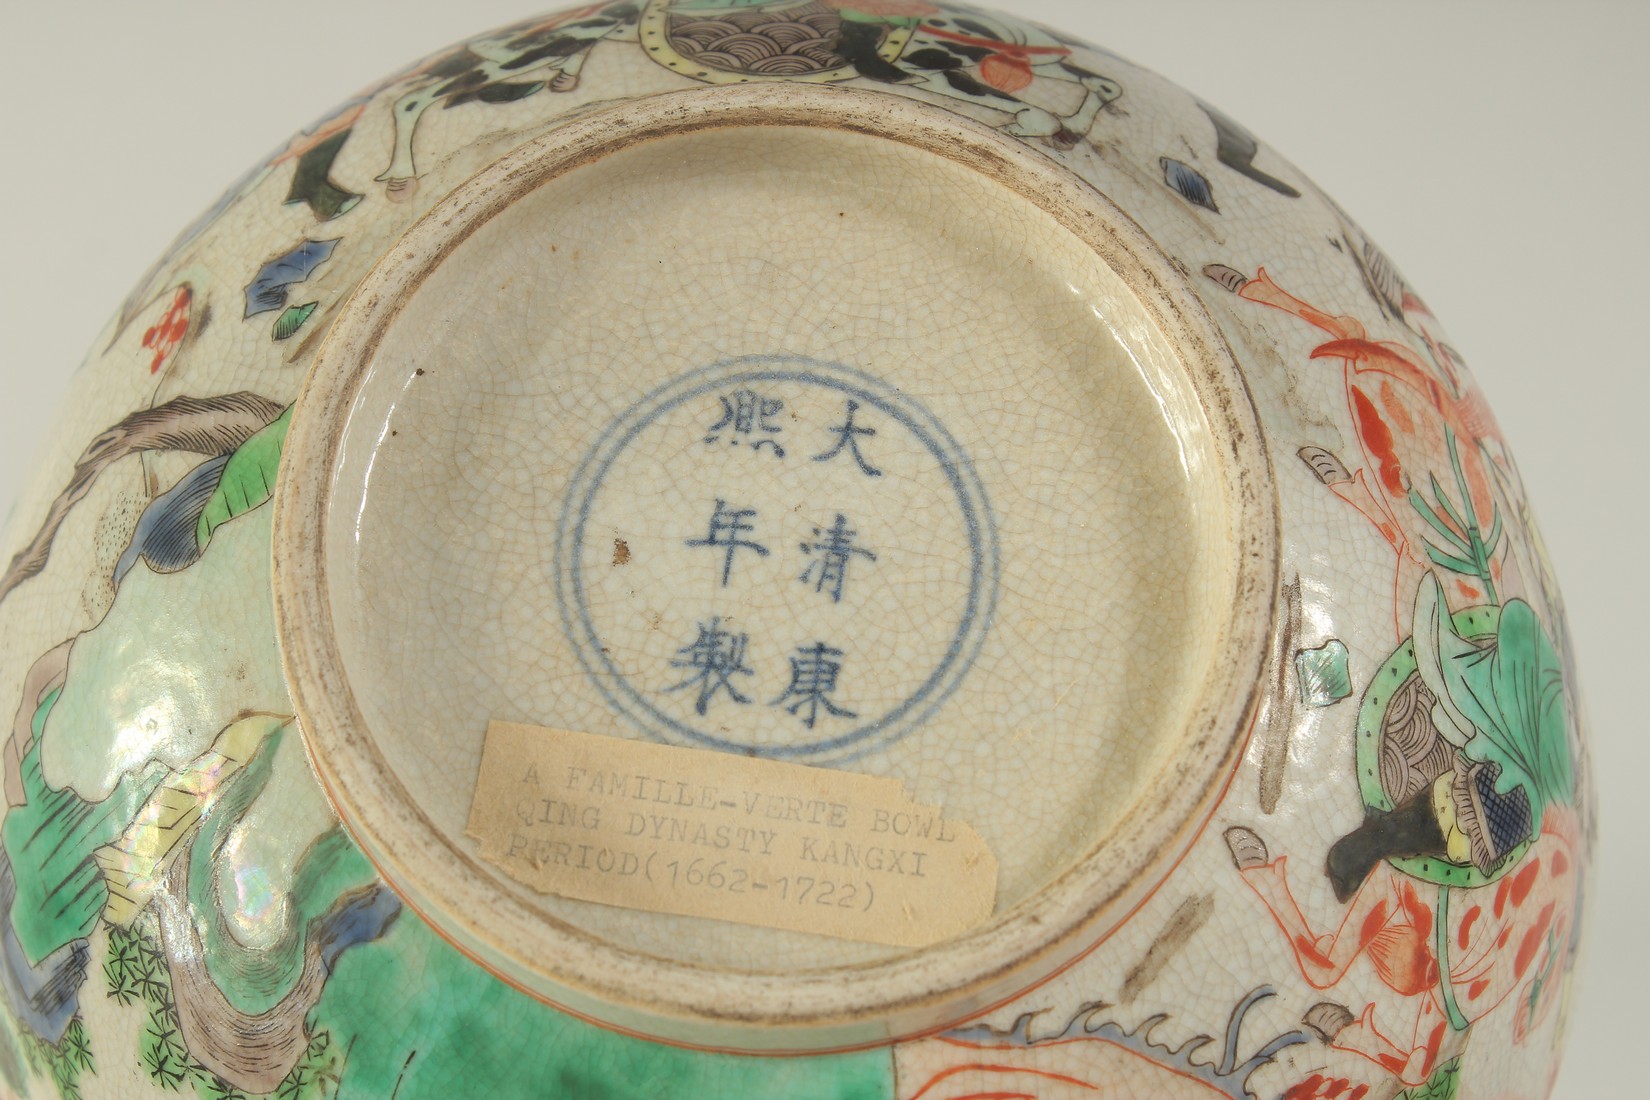 A CHINESE FAMILLE VERTE PORCELAIN BOWL - possibly Qing dynasty, with hardwood stand, the exterior - Image 7 of 7